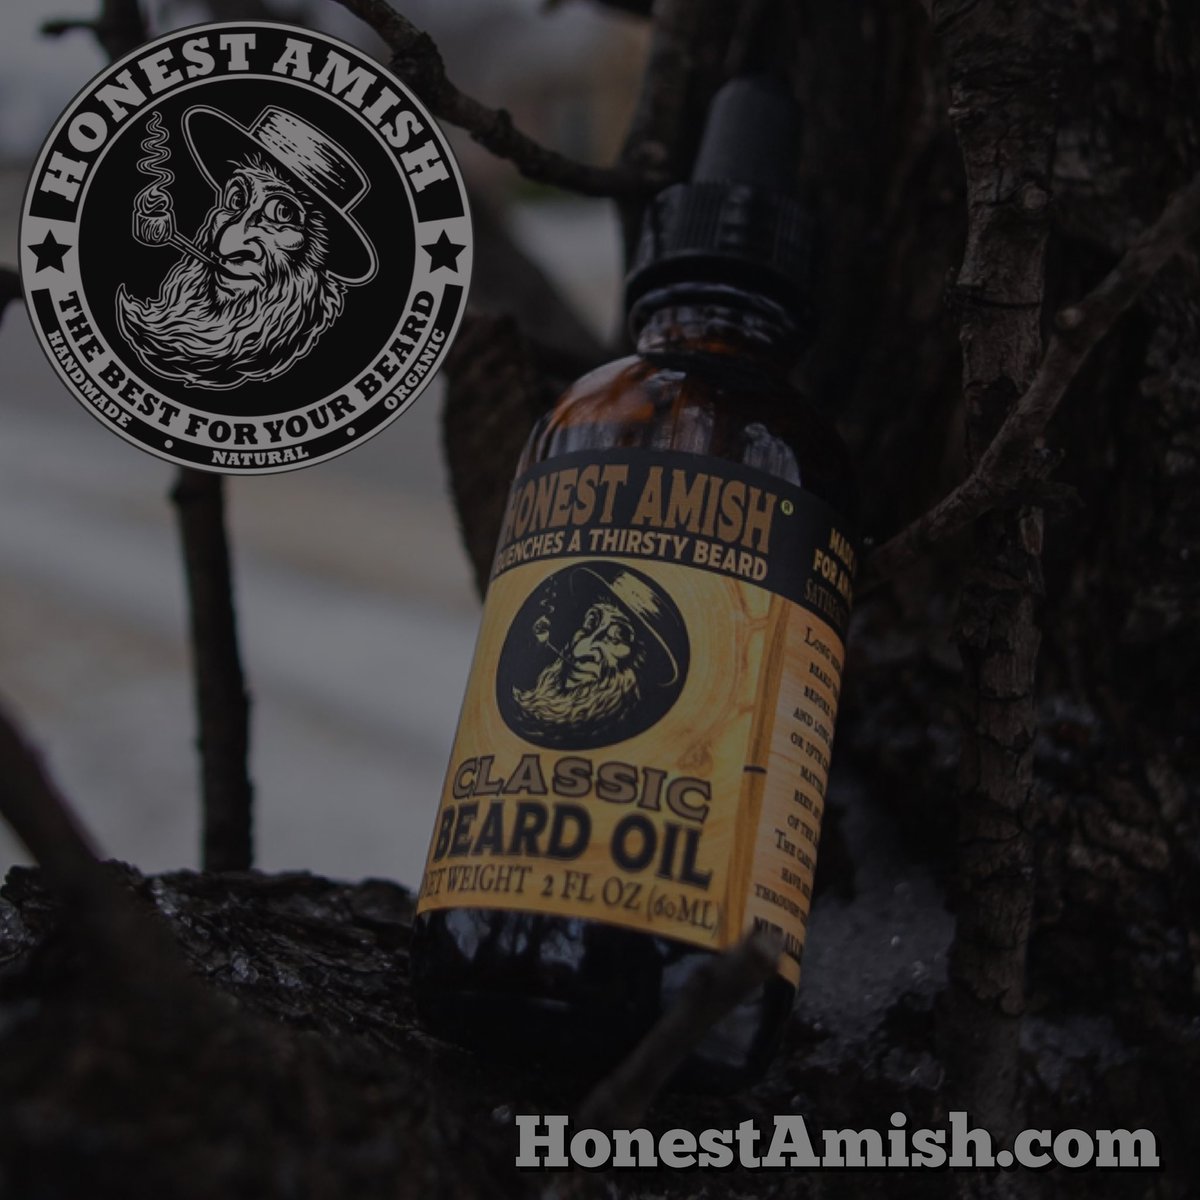 Nothing better than our Classic oil on a chilly morning! 

#naturalsoap | #thebestforyourbeard | #beardoil | #beardbalm | #beardwax | #honestamish HonestAmish.com